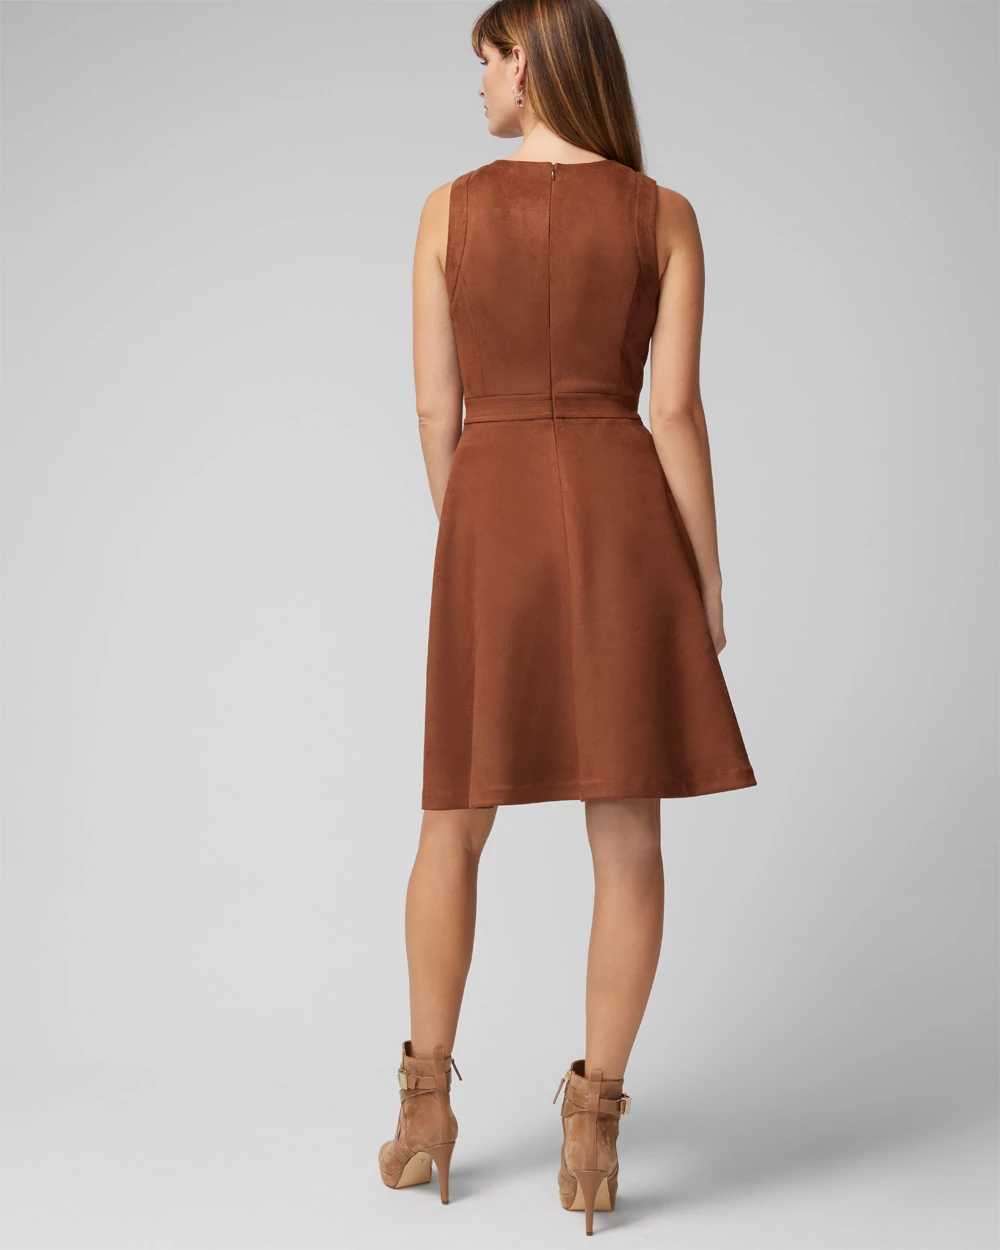 Petite Sleeveless Crest Detail Suede Fit-N-Flare Dress click to view larger image.